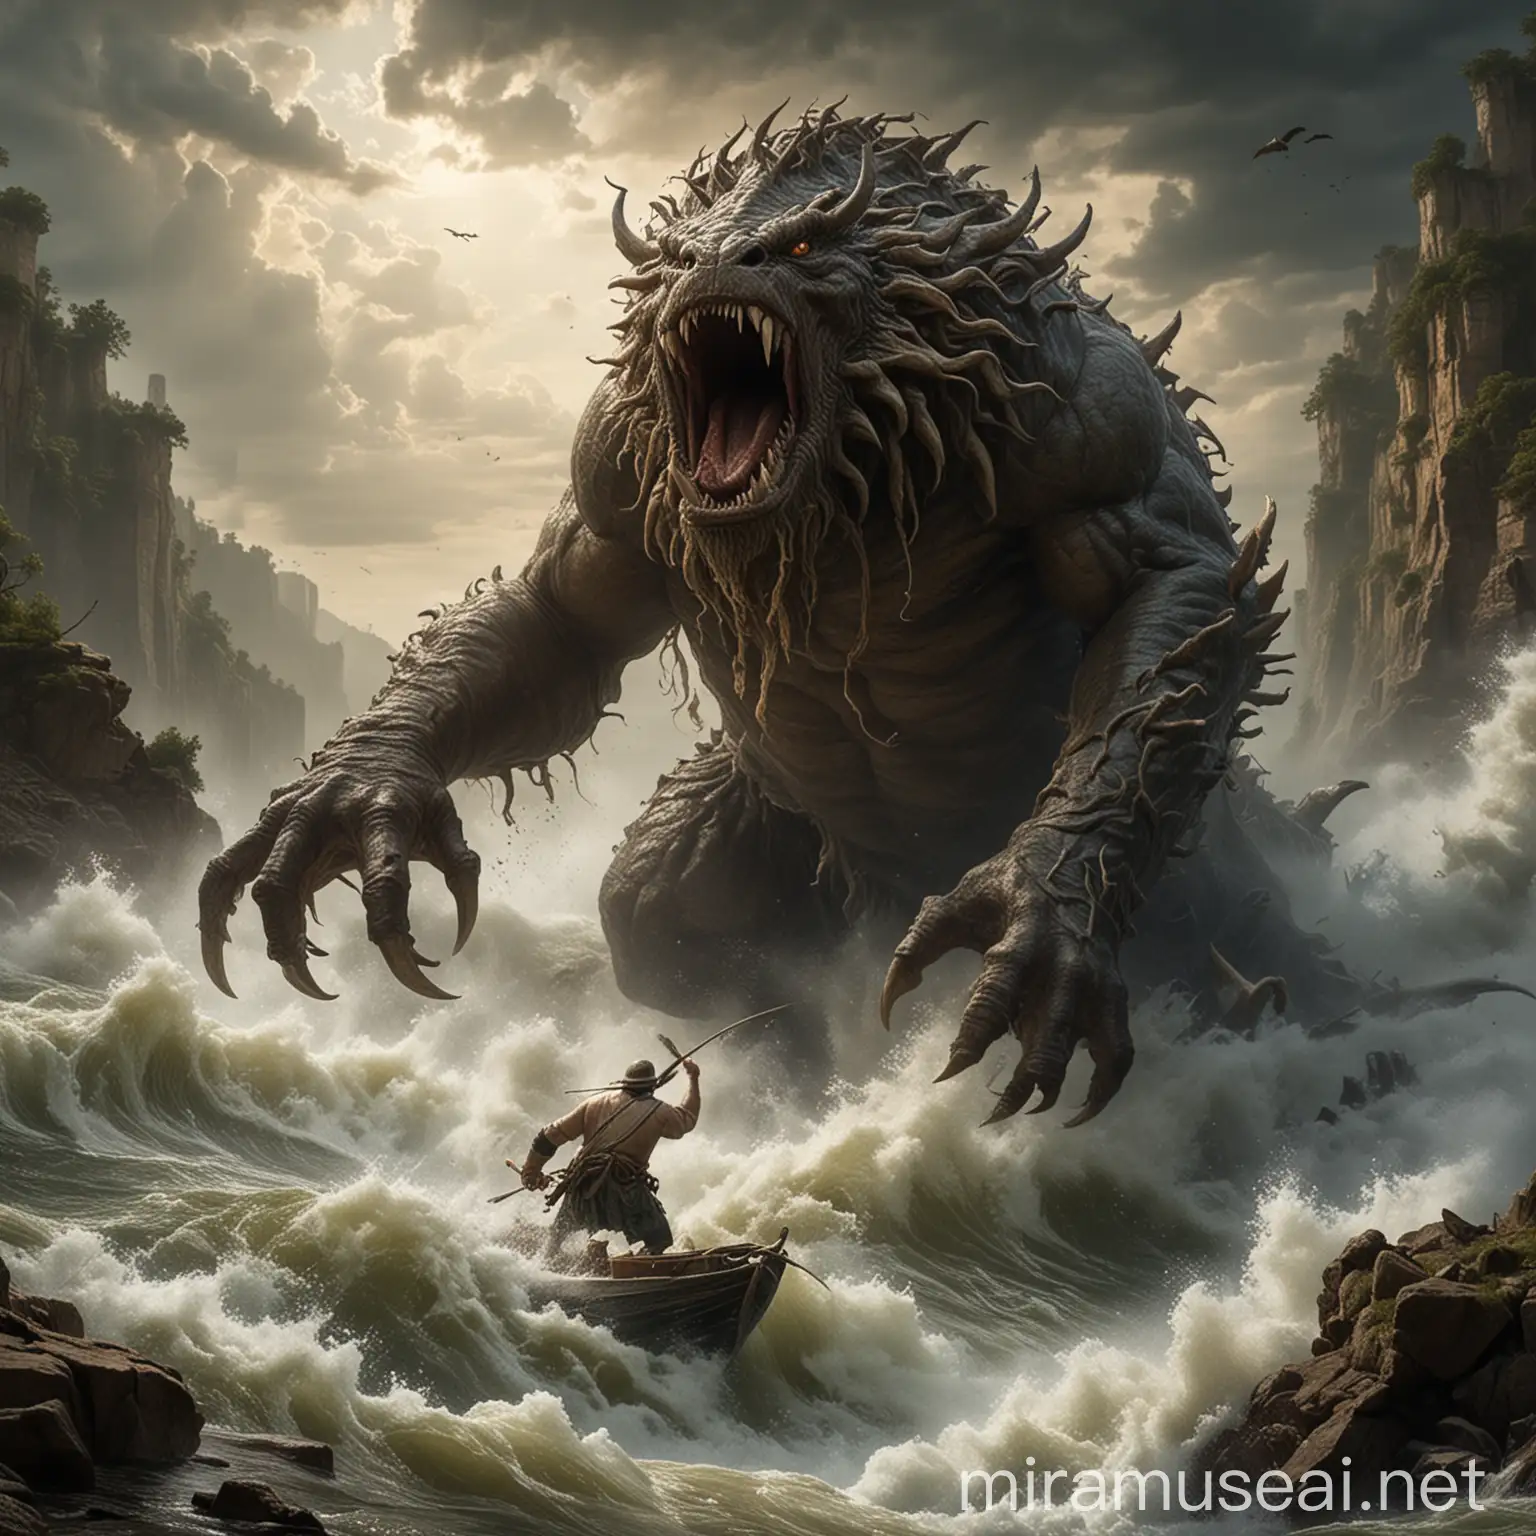 Courageous Fisherman Confronting Monstrous River Beast